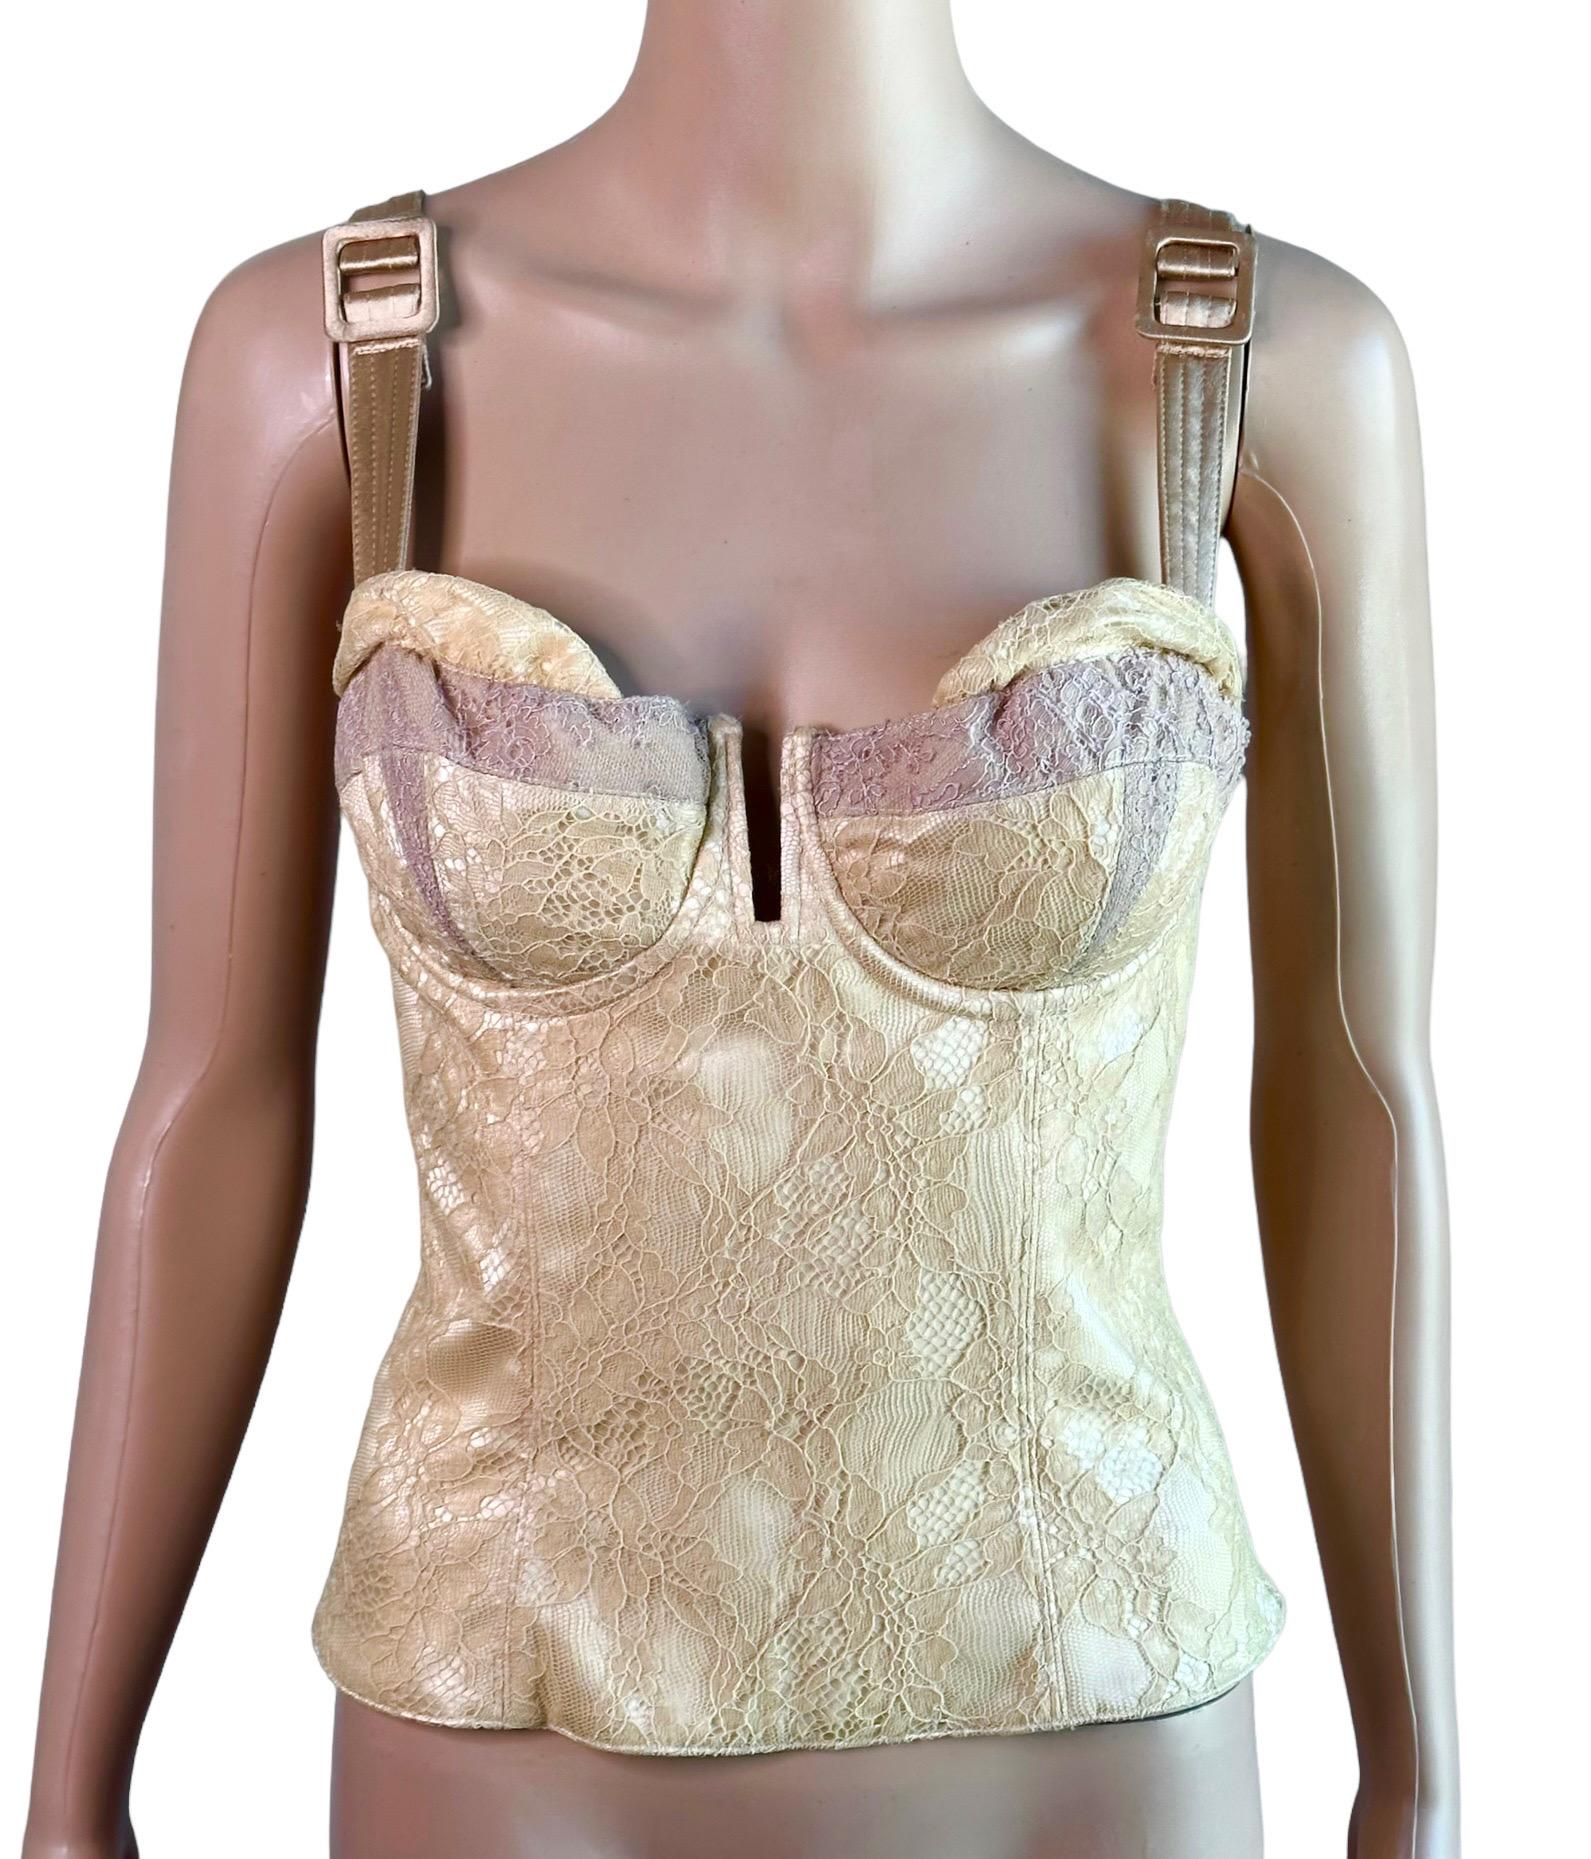 Christian Dior By John Galliano S/S 2004 Runway Bustier Lace Corset Crop Top For Sale 4